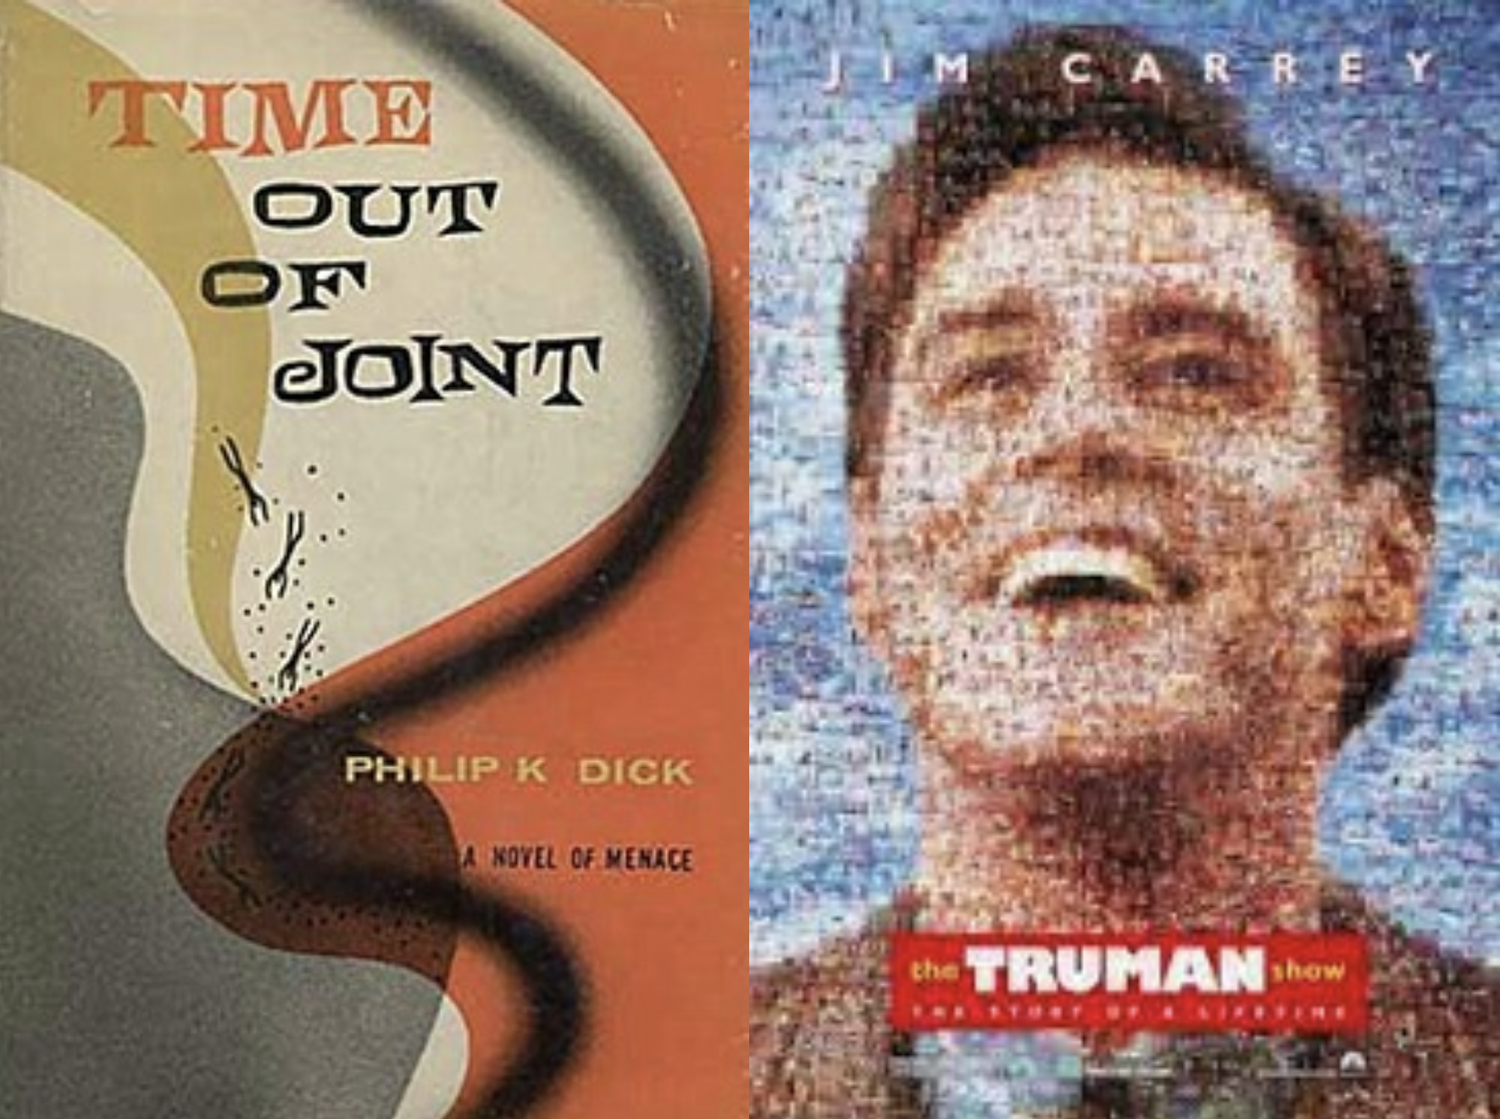 Episode 100 - The Truman Show and PKDs Time Out of Joint